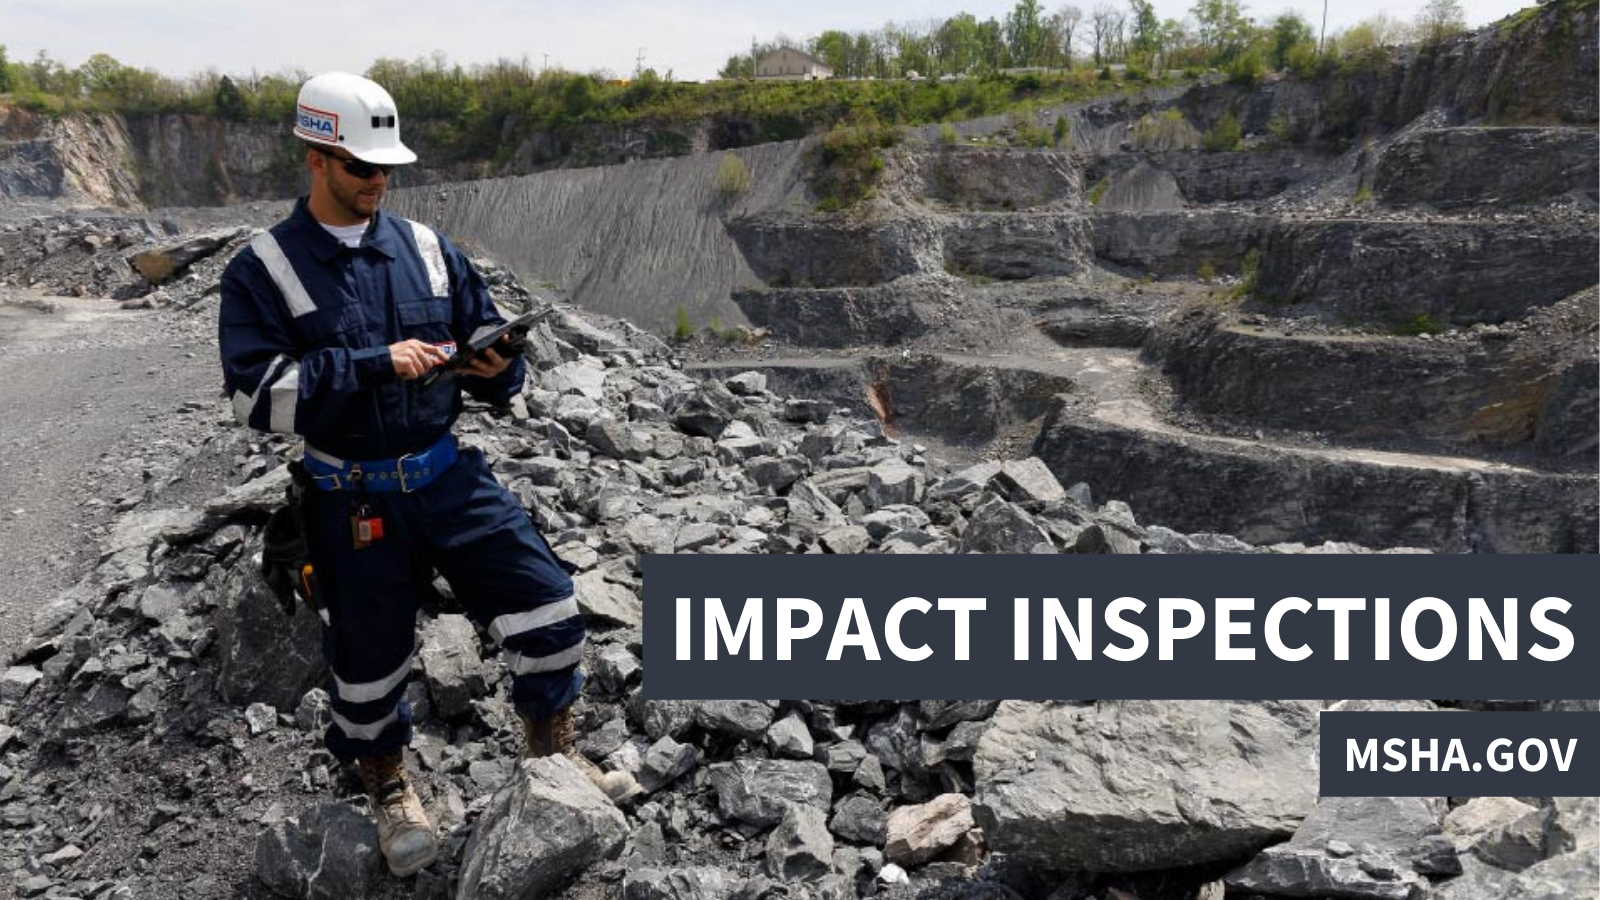 An MSHA inspector uses a tablet while standing on a pile of rocks at an outdoor mining site. "Impact inspections, msha.gov"